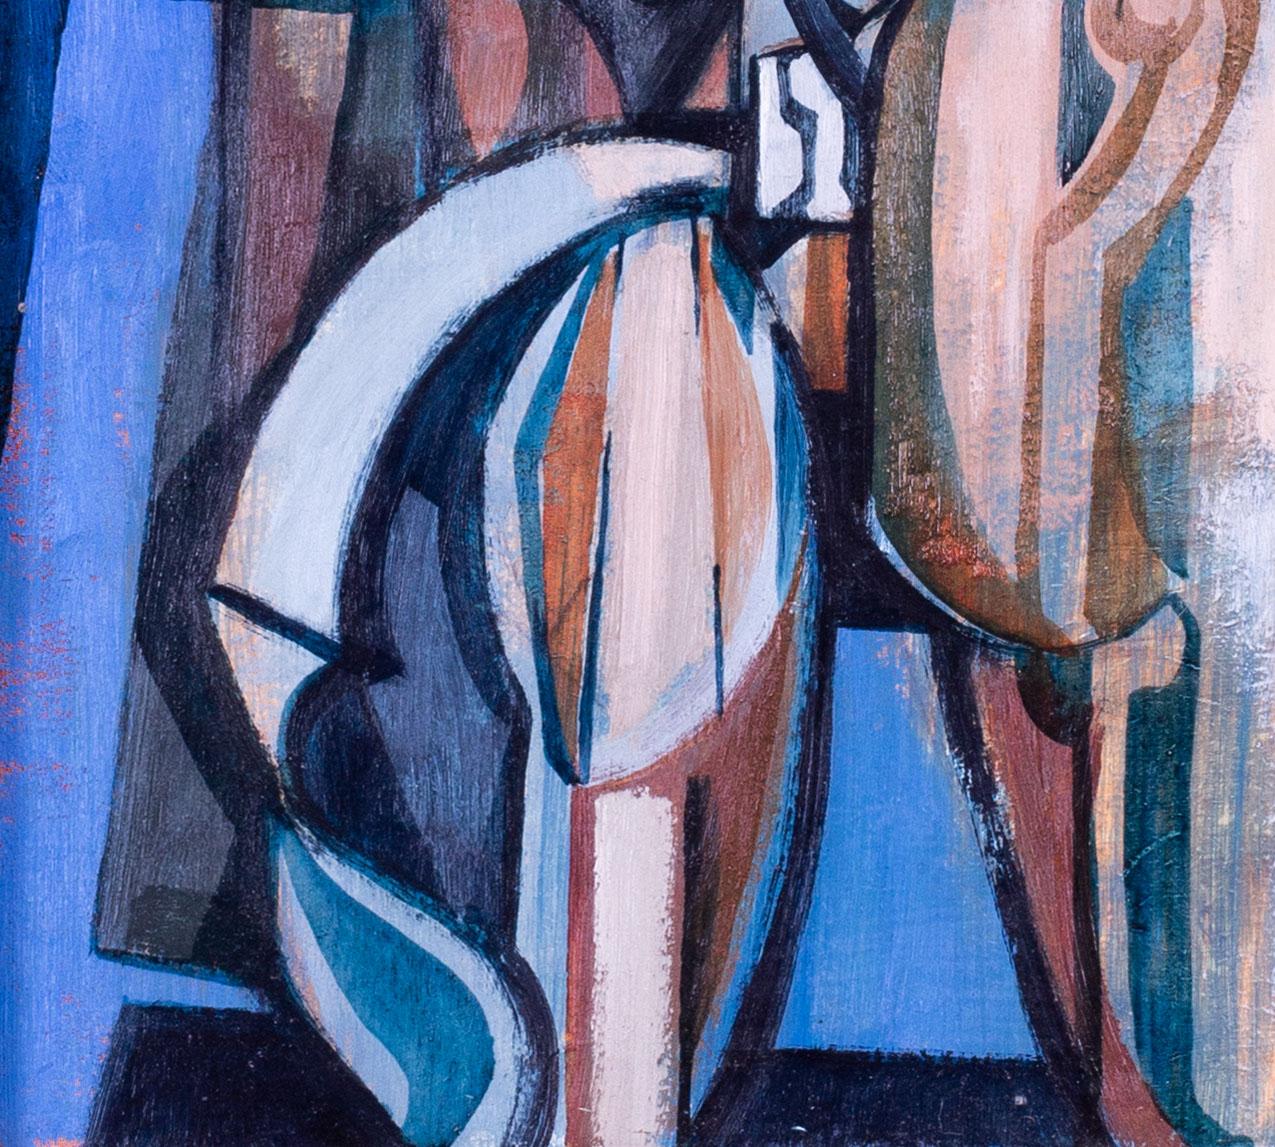 20th Century British abstract painting 'Gladiator' by Roger Smith, in blues 2